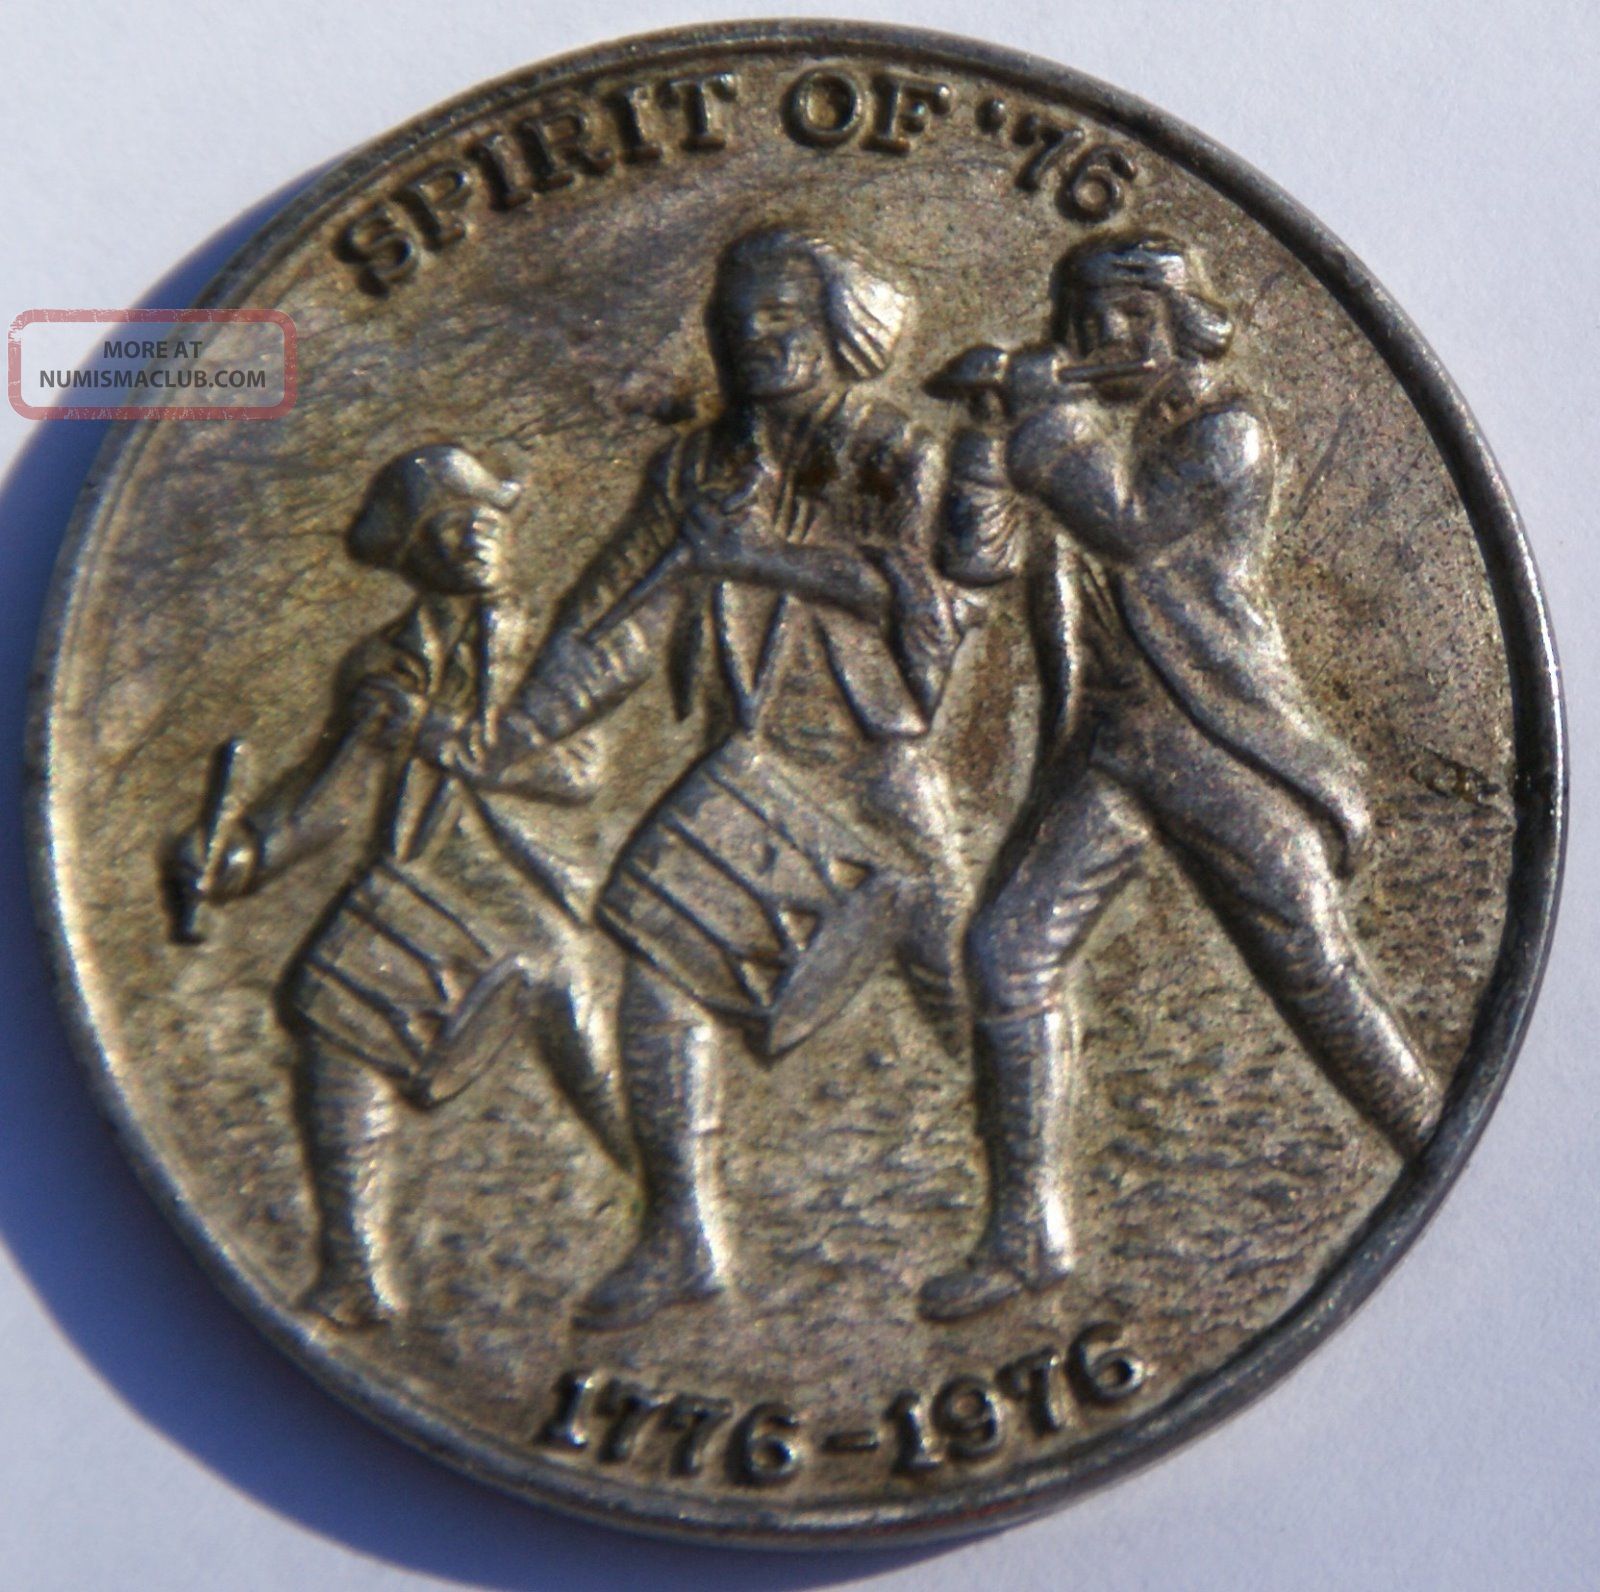 Spirit Of ' 76 1776 - 1976 The Great Seal Of The United States Of America Medal Exonumia photo